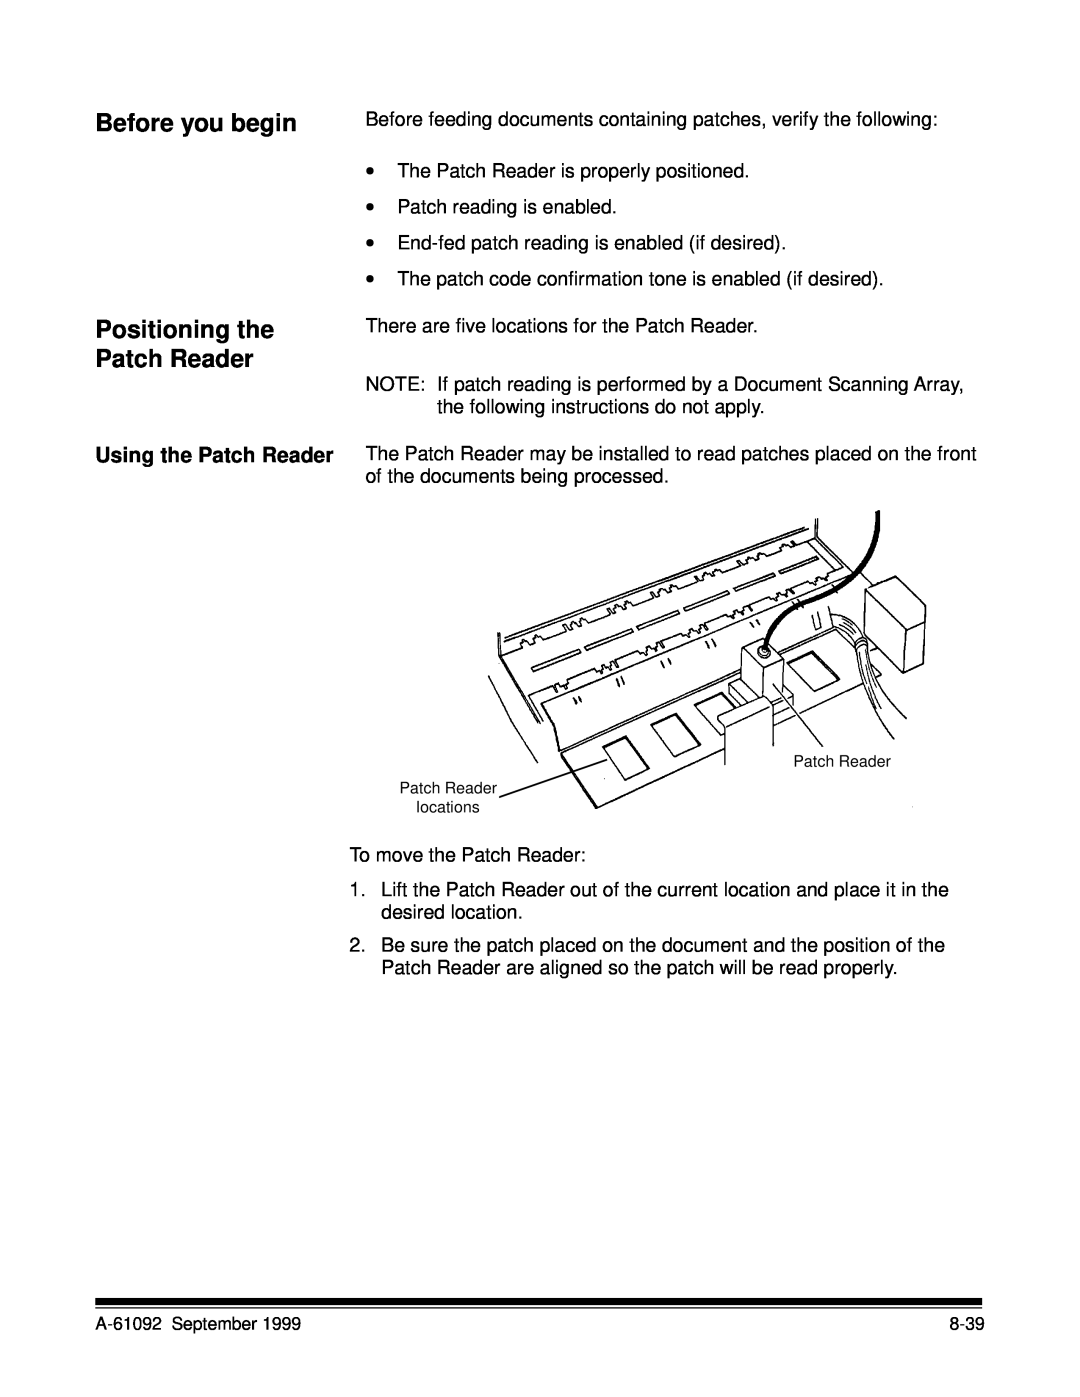 Kodak A-61092 manual Before you begin, Positioning the Patch Reader 